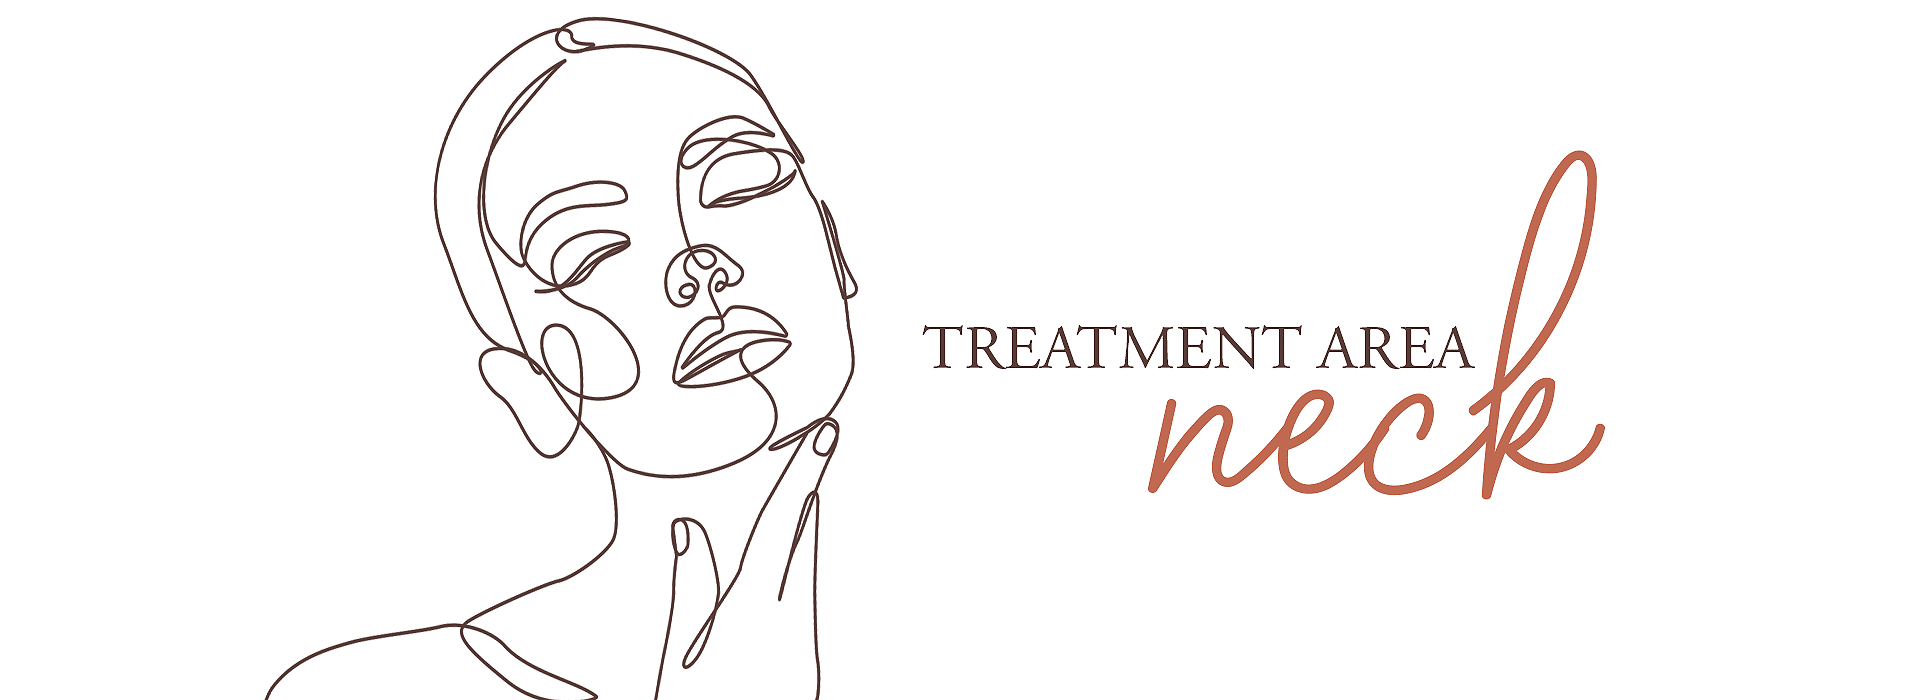 medical aesthetic treatments for neck